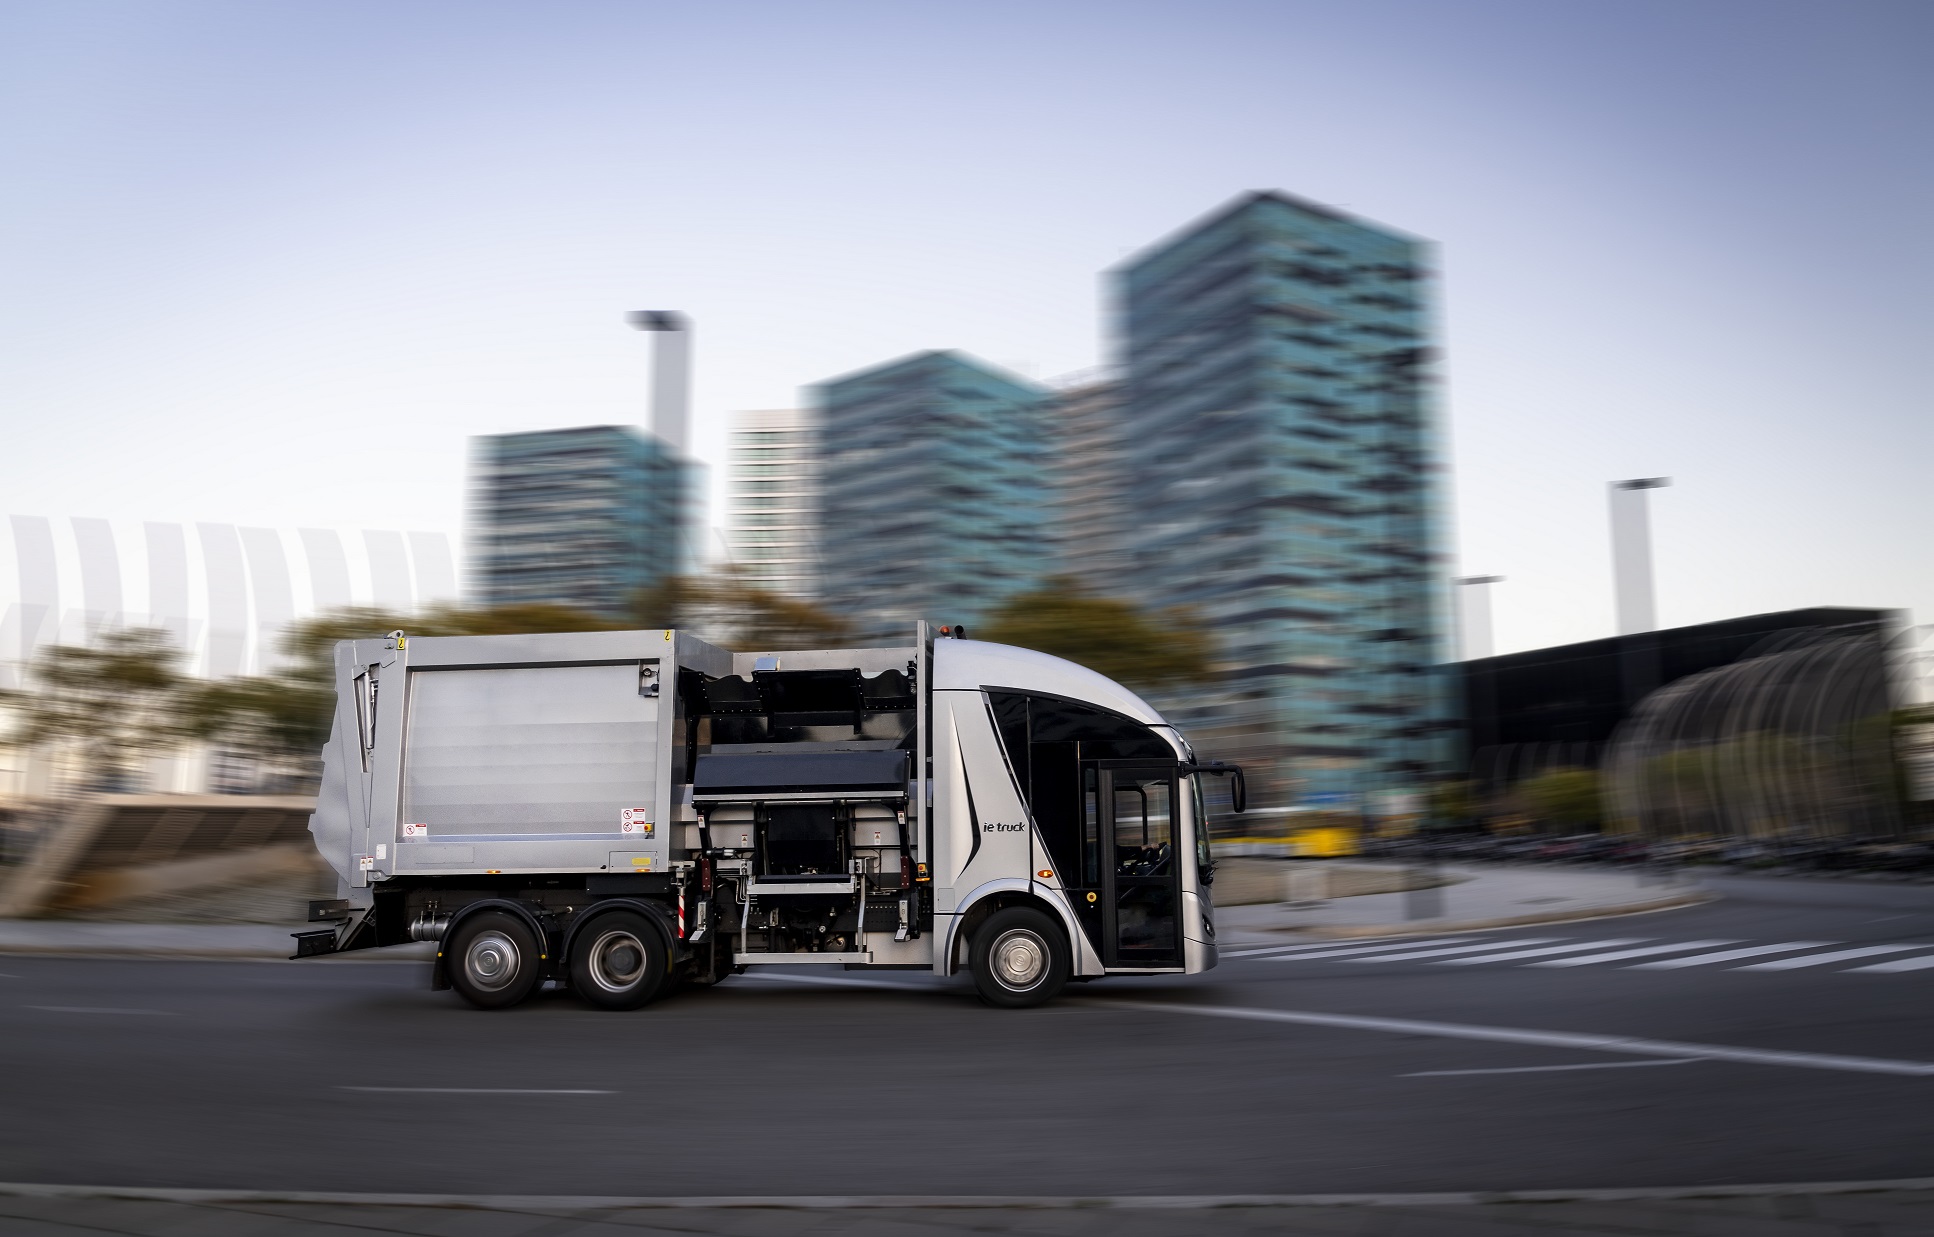 FCC Medio Ambiente and Irizar agree to produce the first 10 Irizar ie urban electric trucks